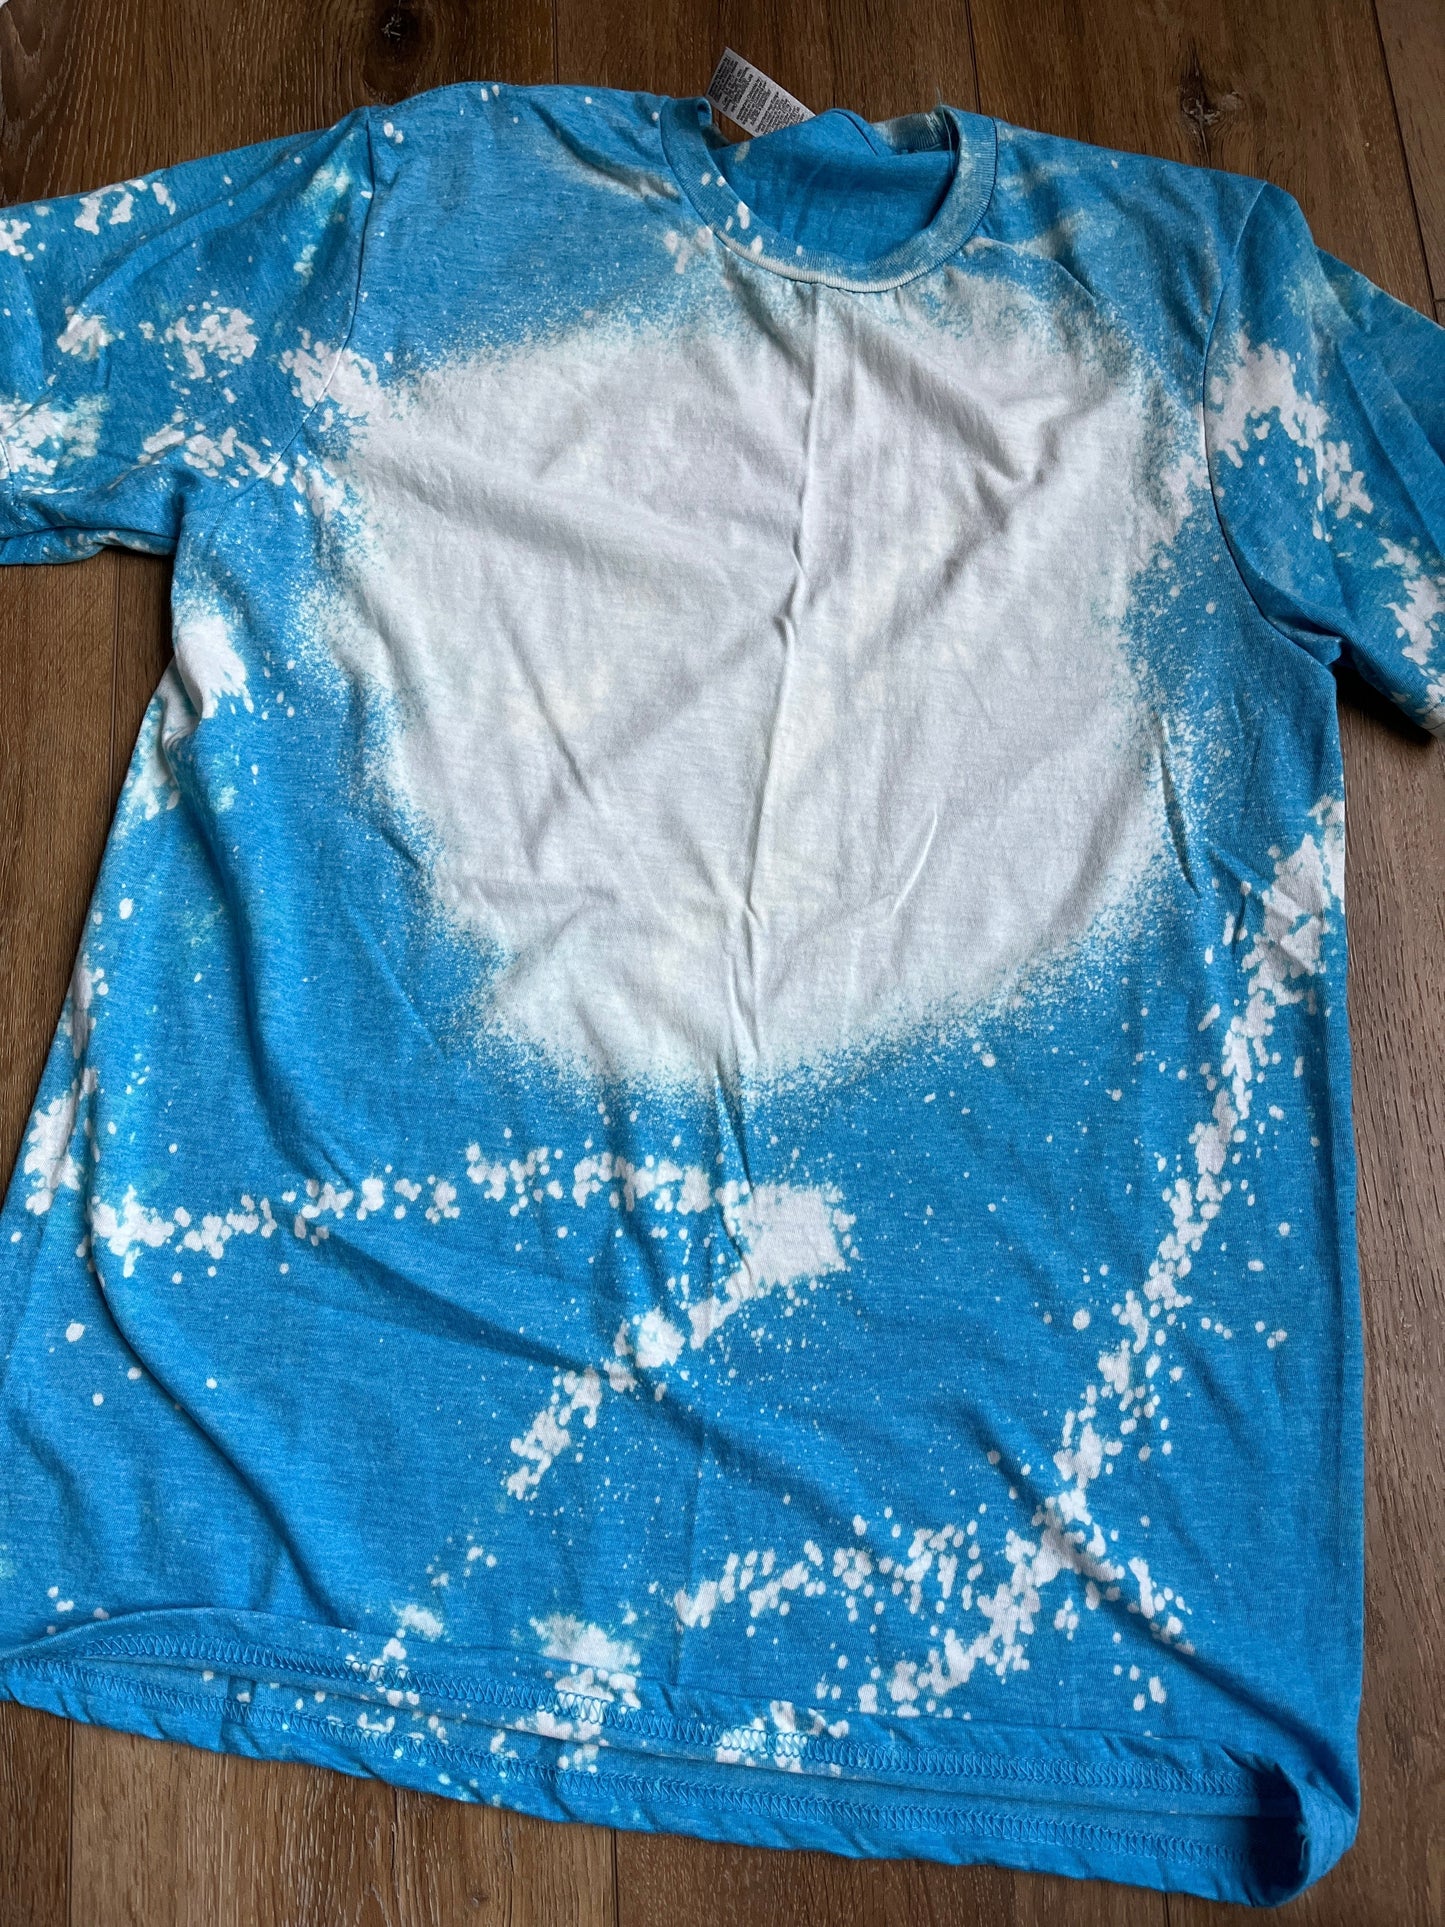 Size 2XL Build Your Own Bleached Tee--CHOOSE DESIGN IN GROUP